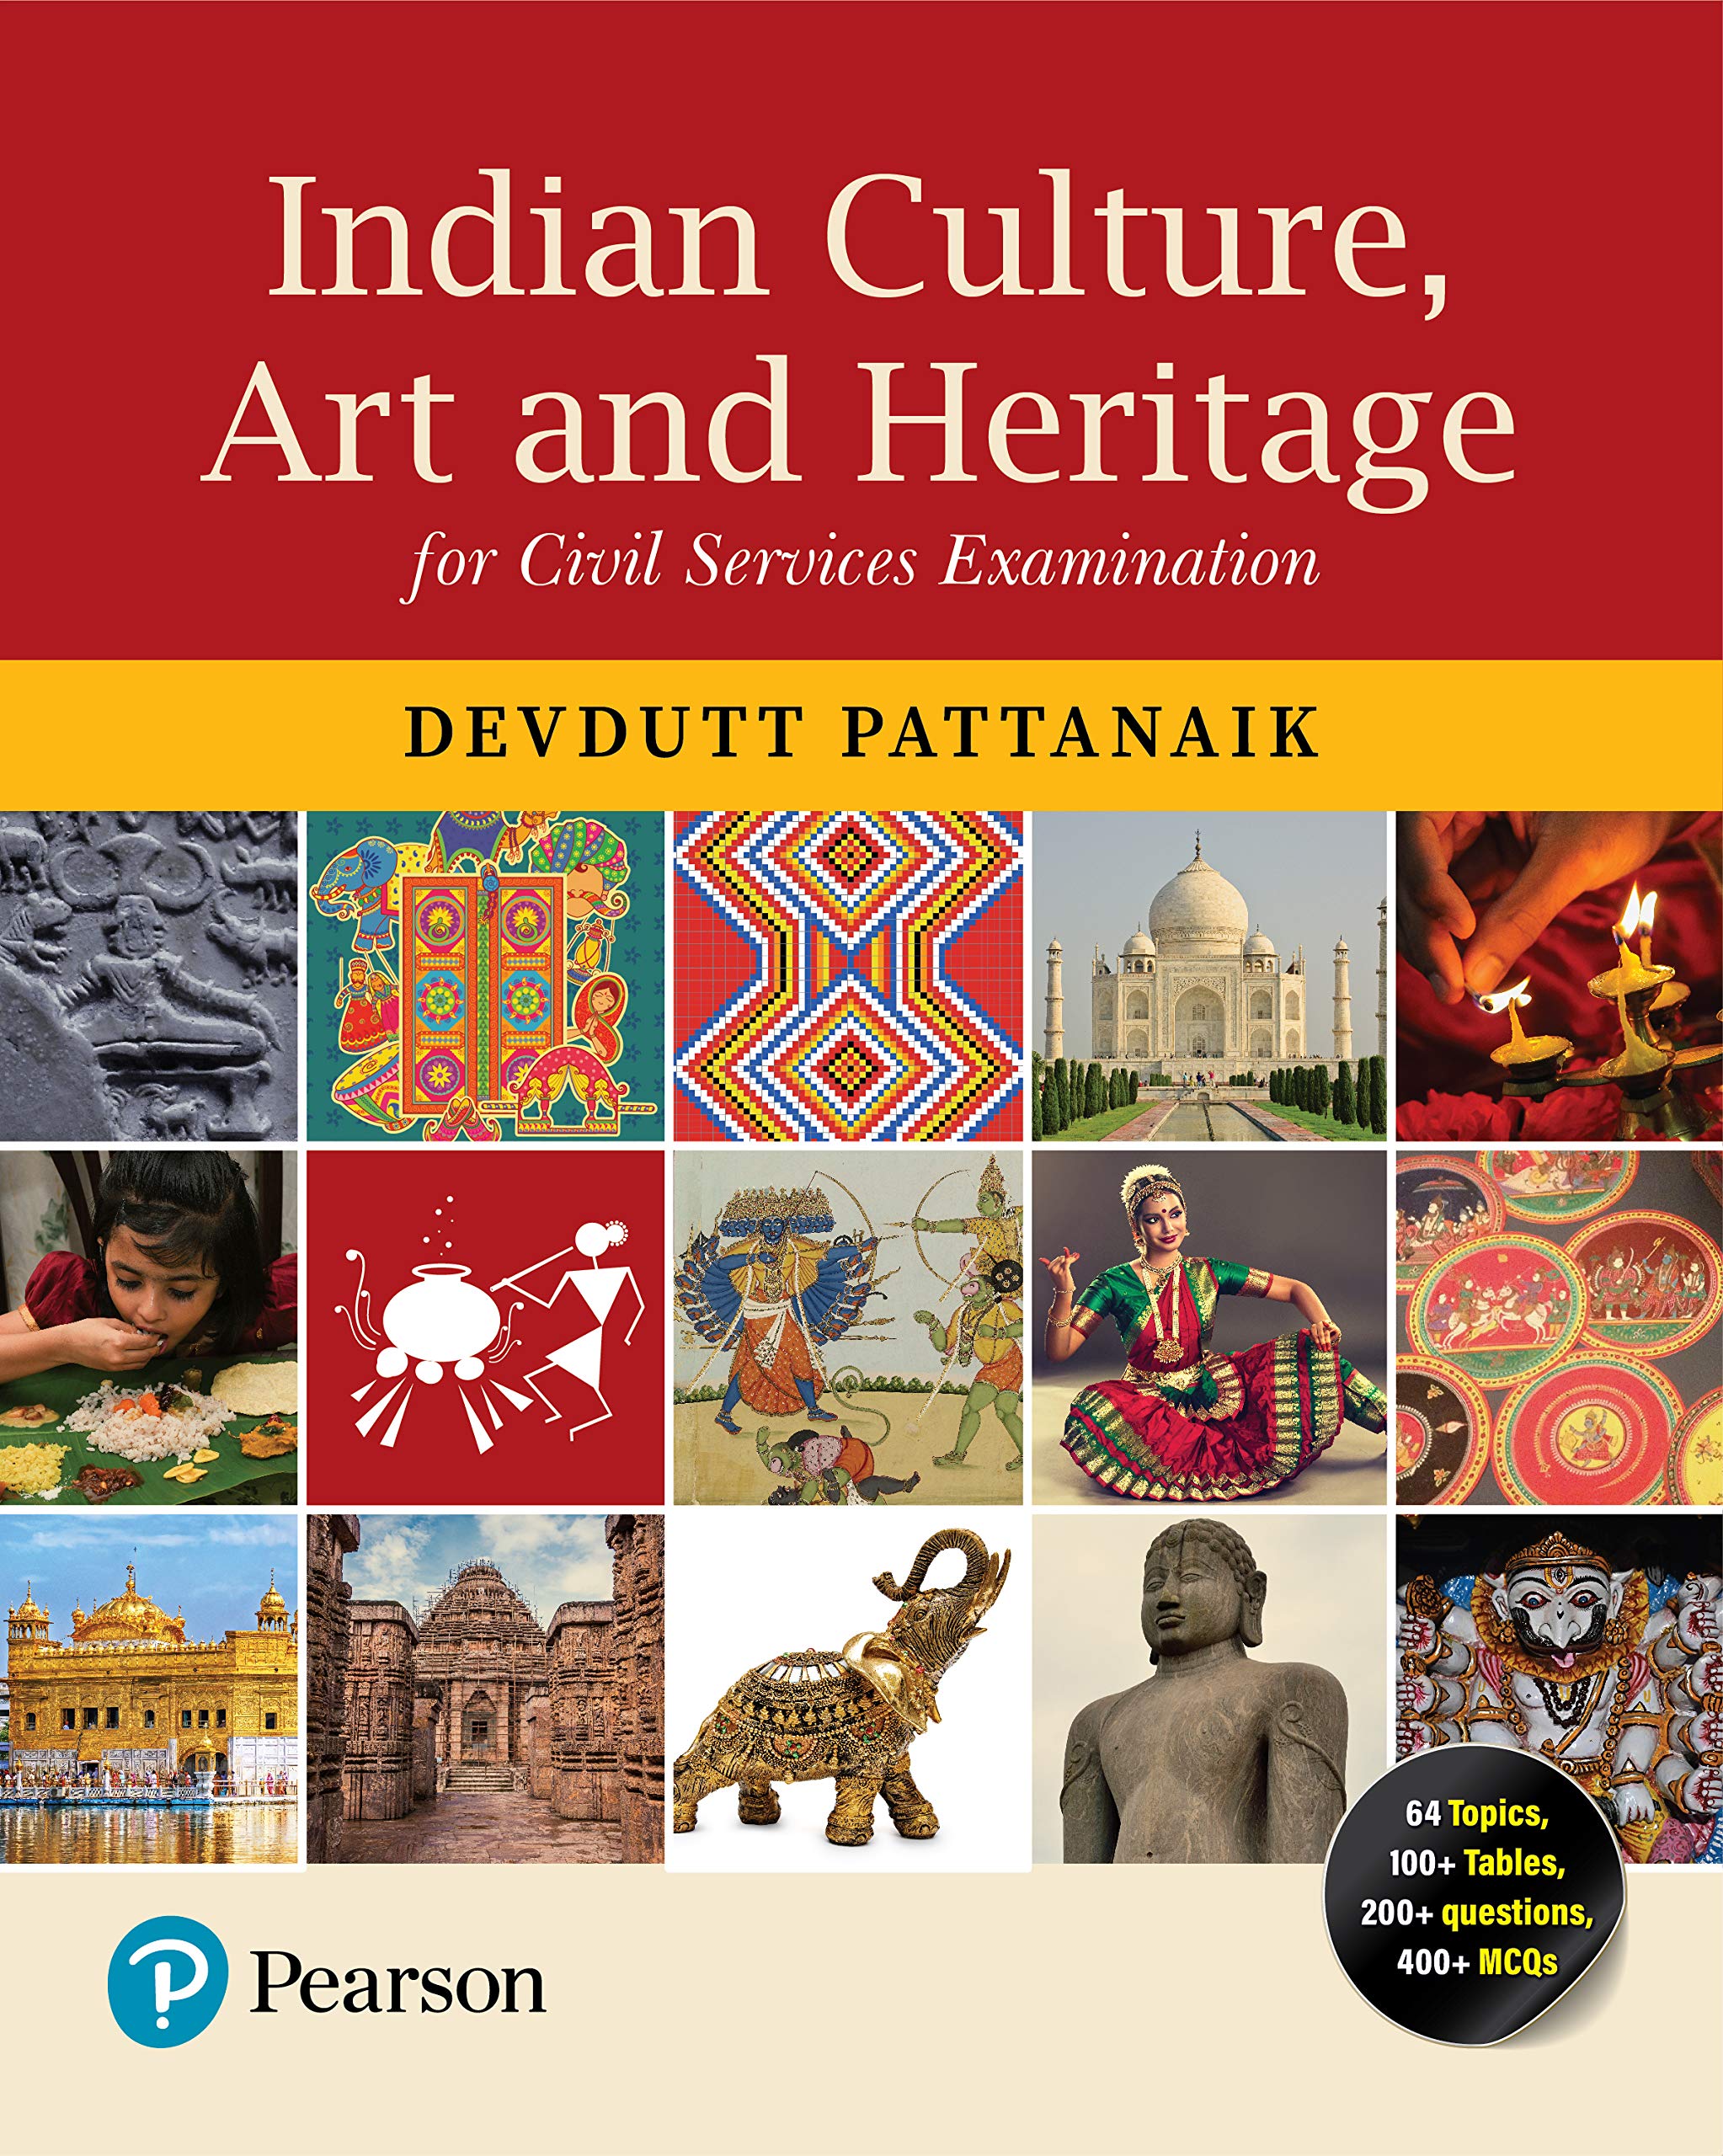 “Indian Culture, Art and Heritage” review by Devdutt Pattanaik